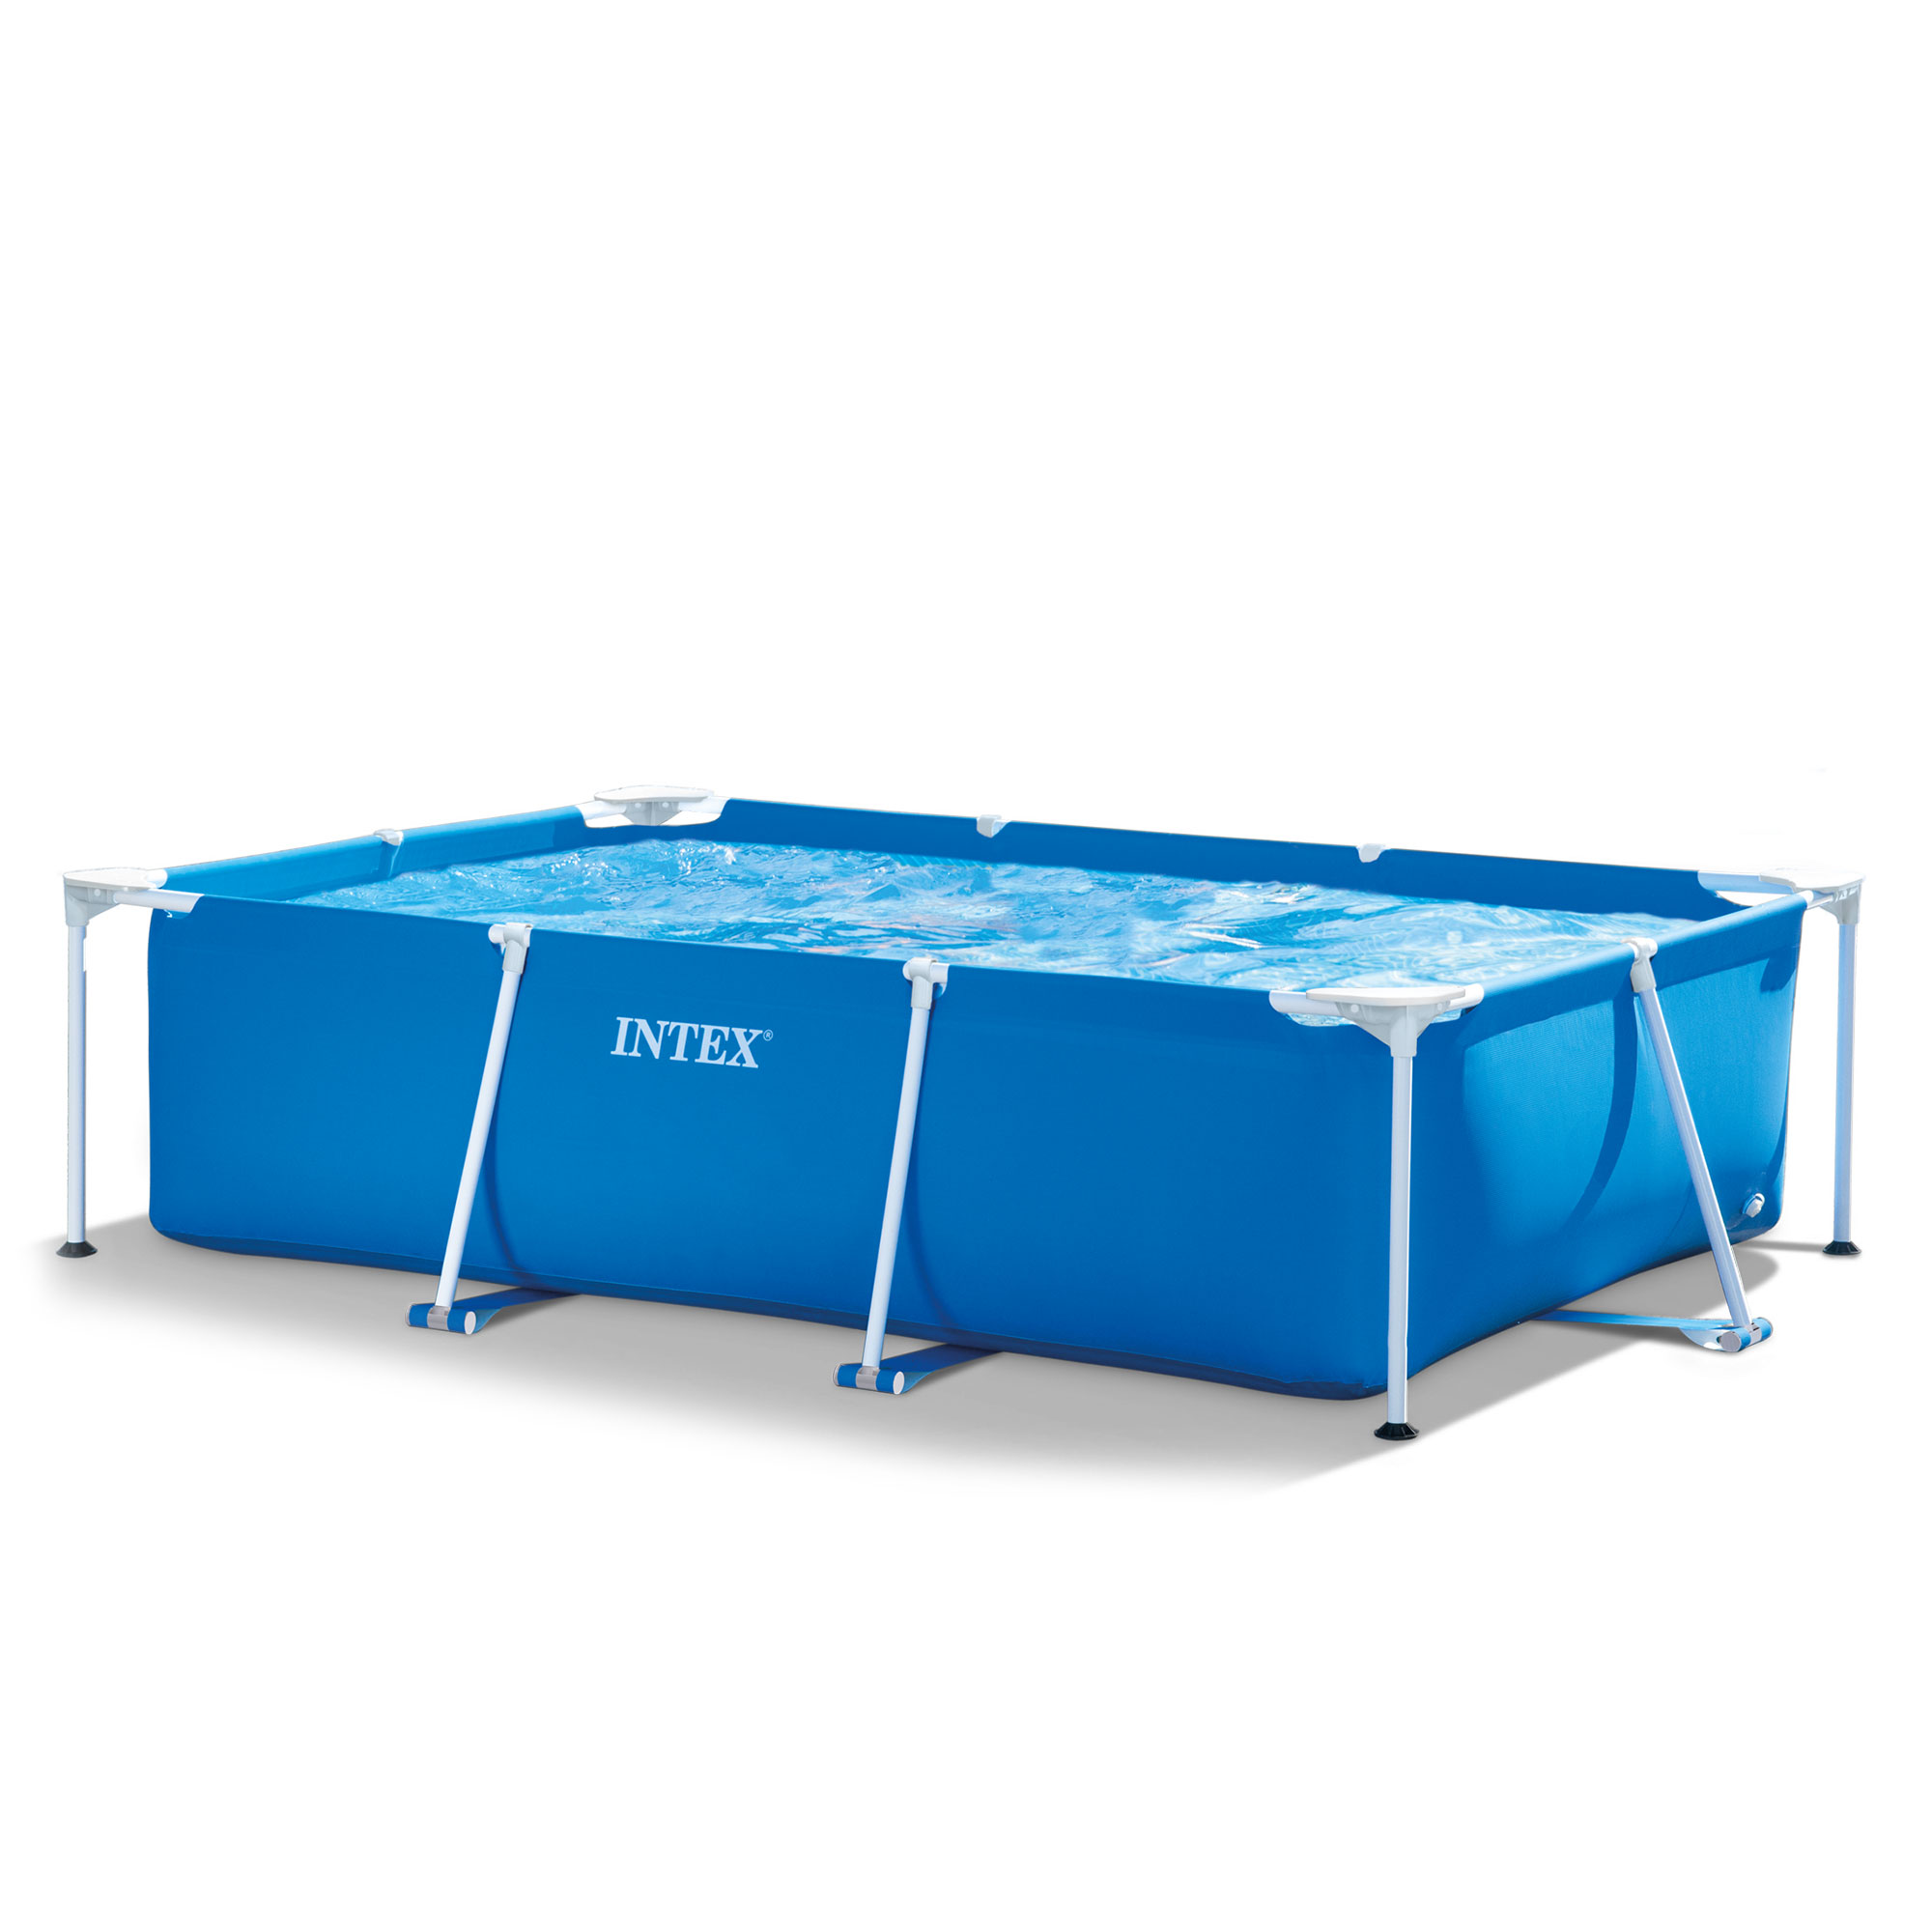 Intex 8.5ft x 26in Rectangular Frame Above Ground Swimming Pool, Blue - image 1 of 11